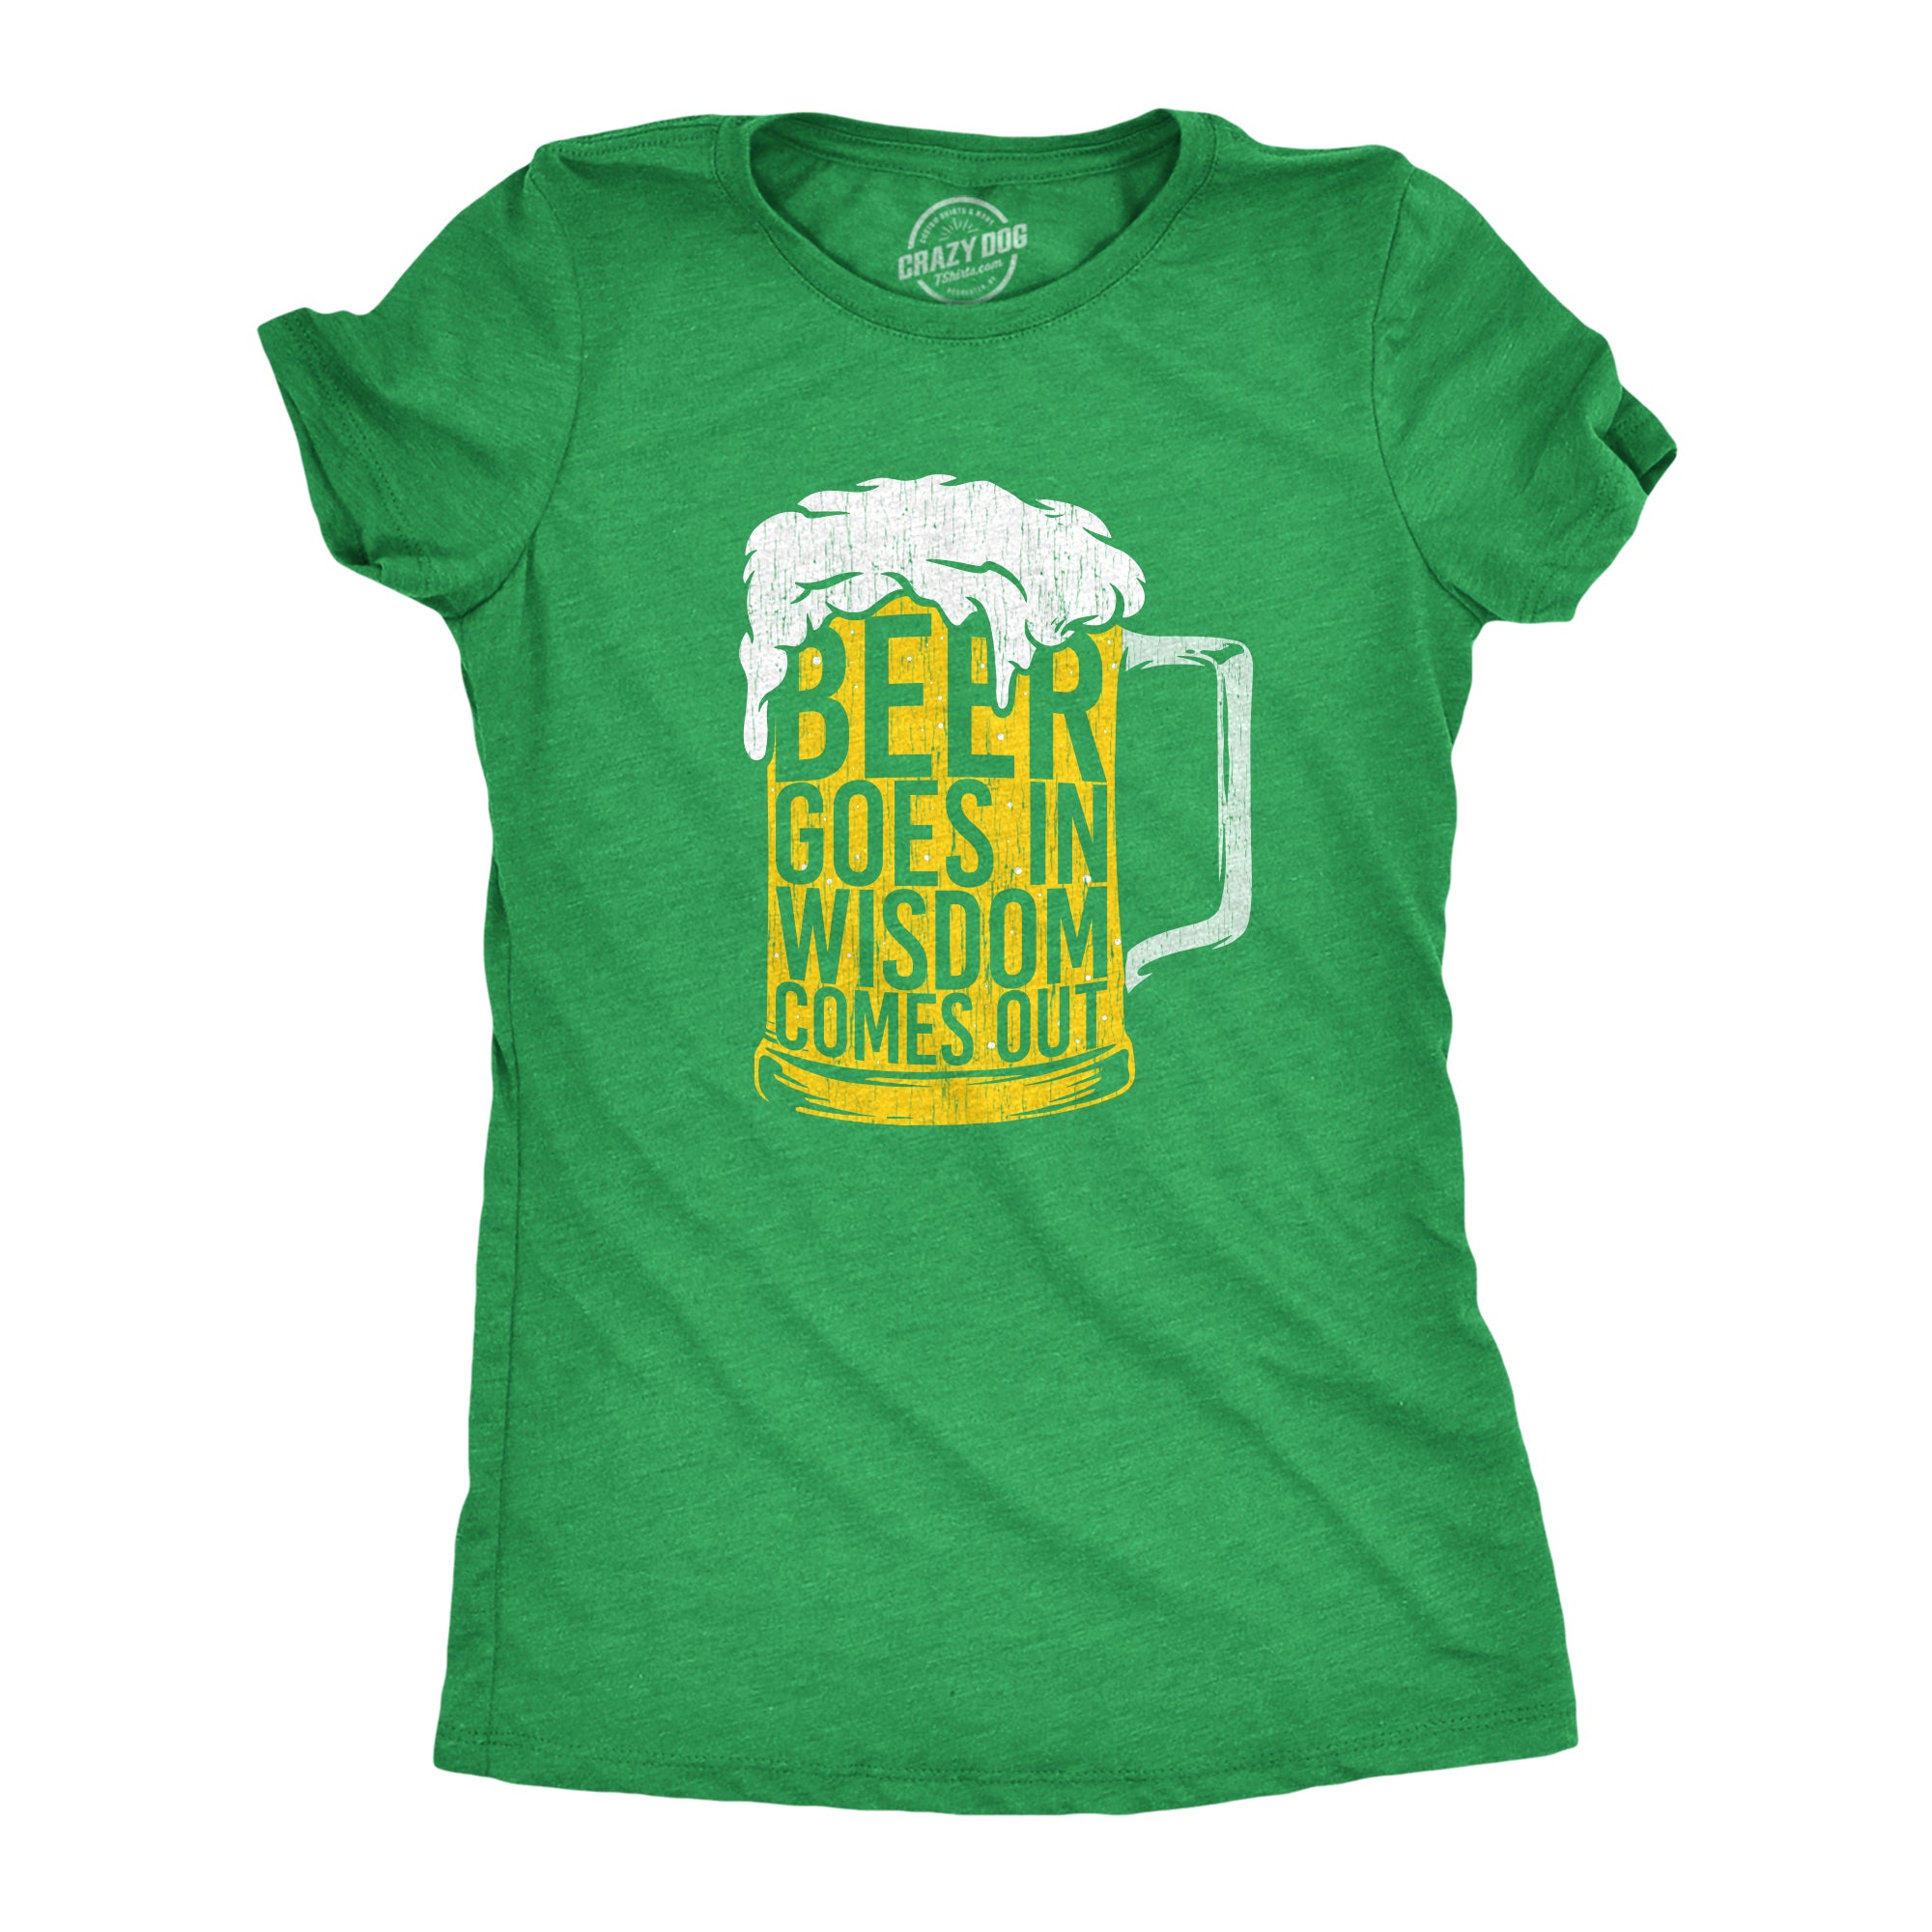 Funny Heather Green - WISDOM Beer Goes In Wisdom Comes Out Womens T Shirt Nerdy Saint Patrick's Day Beer Drinking Tee